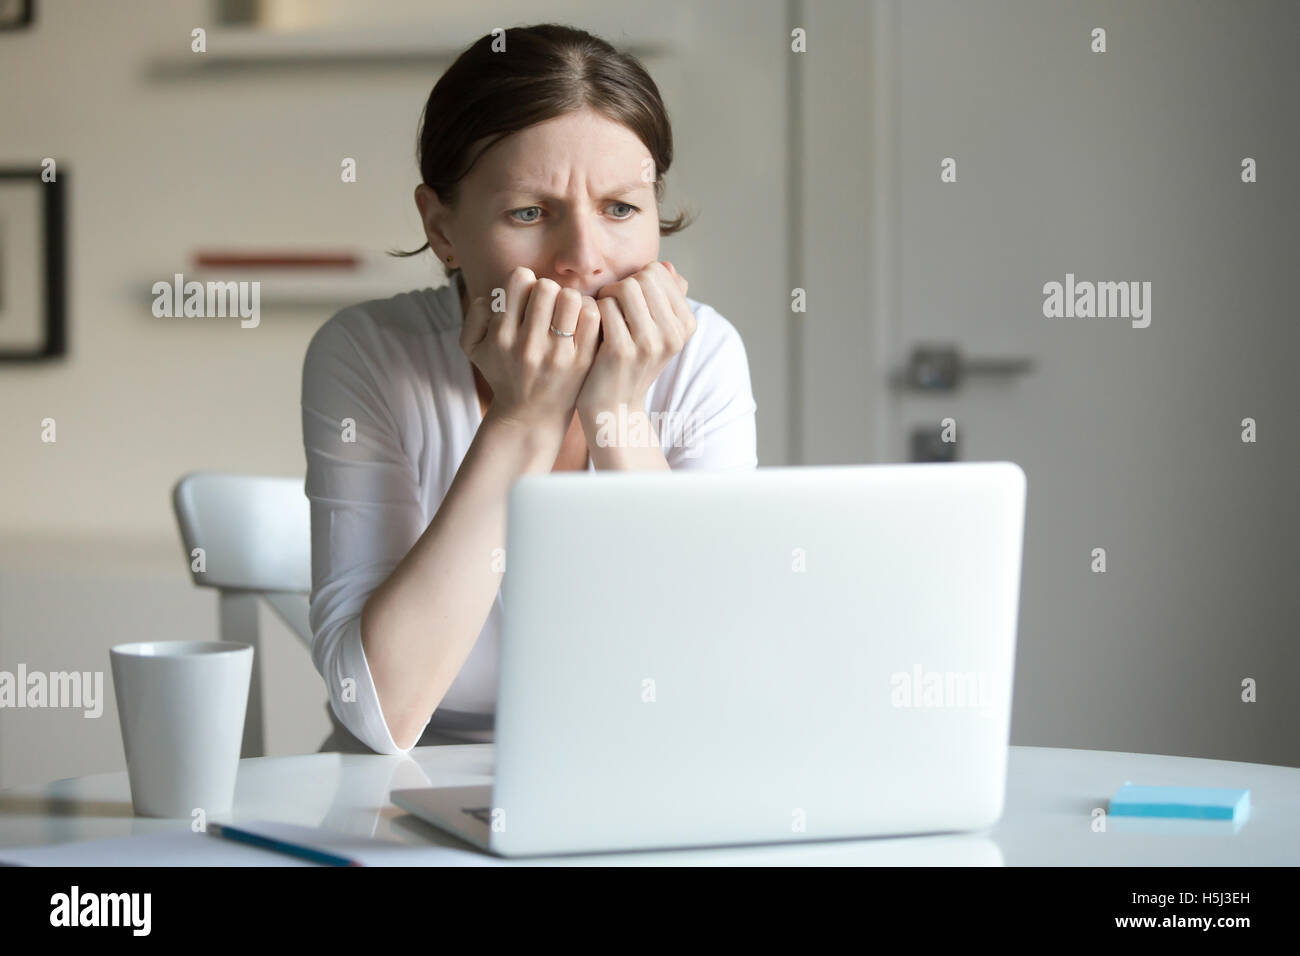 Portrait of a young woman at desk with laptop, fear Stock Photo